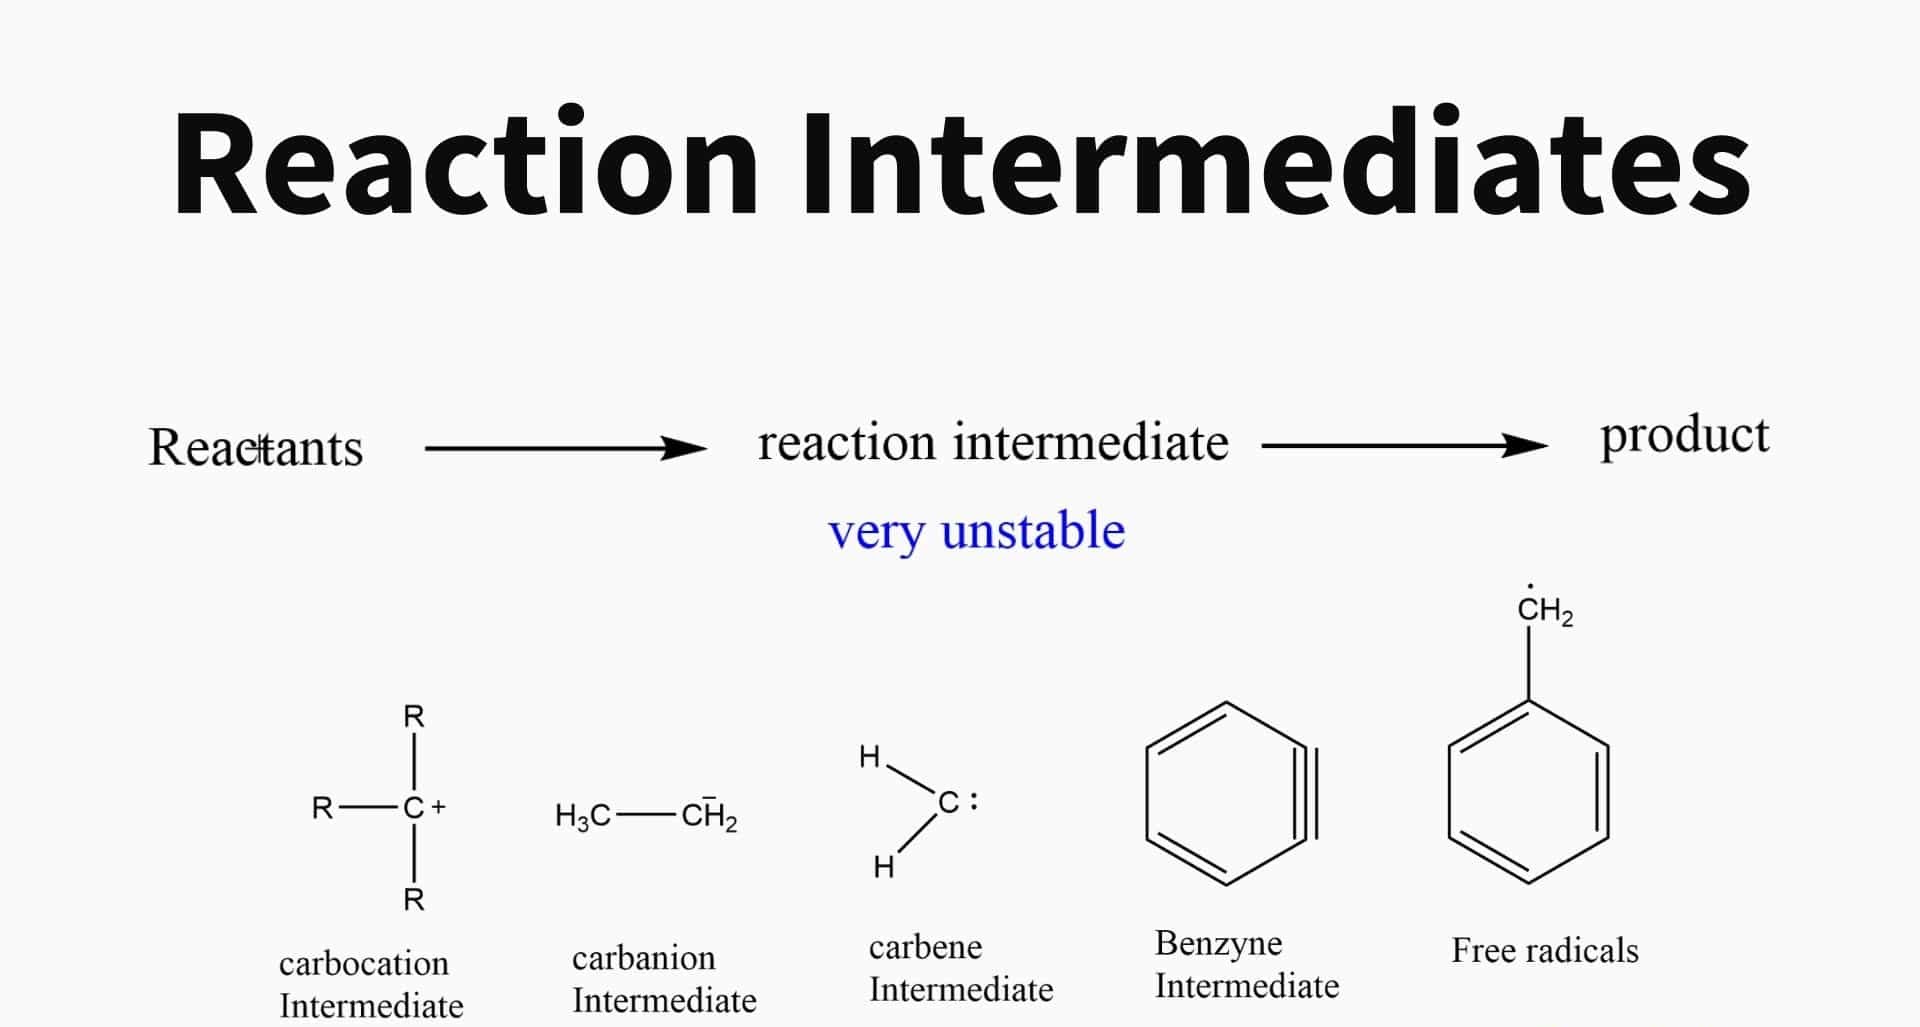 19-fascinating-facts-about-reaction-intermediates